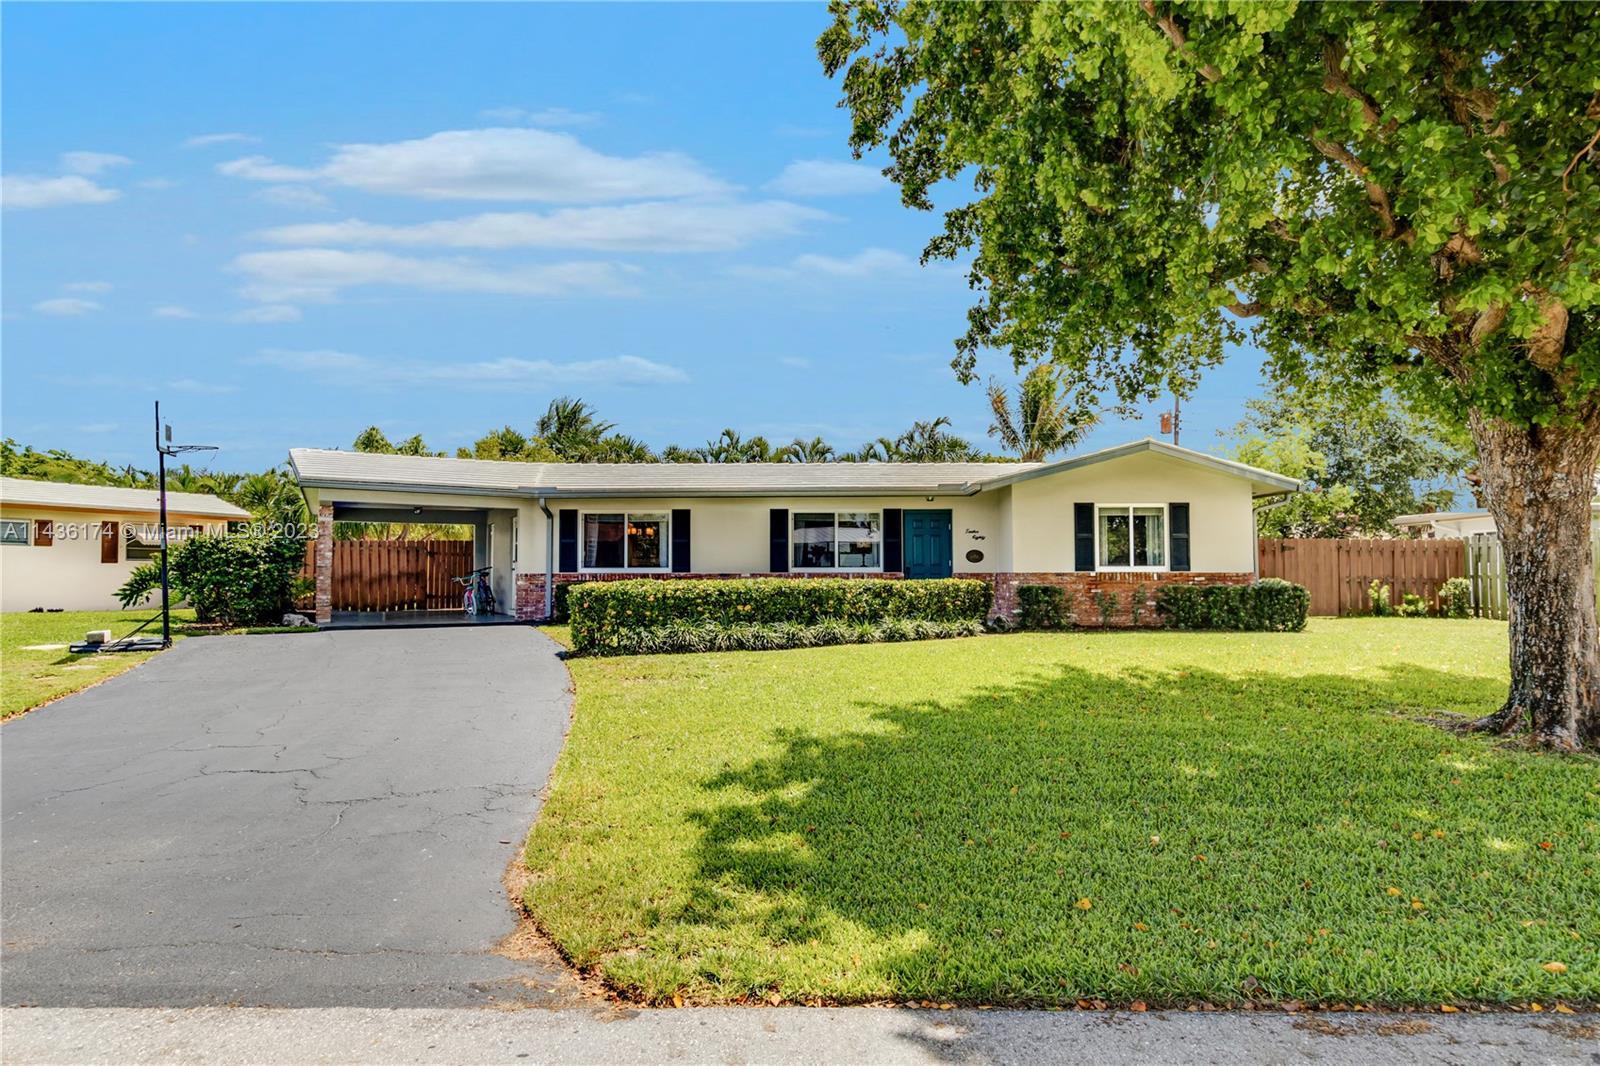 This immaculate 2 bedroom home in East Pompano Beach offers the perfect blend of comfort, style, and